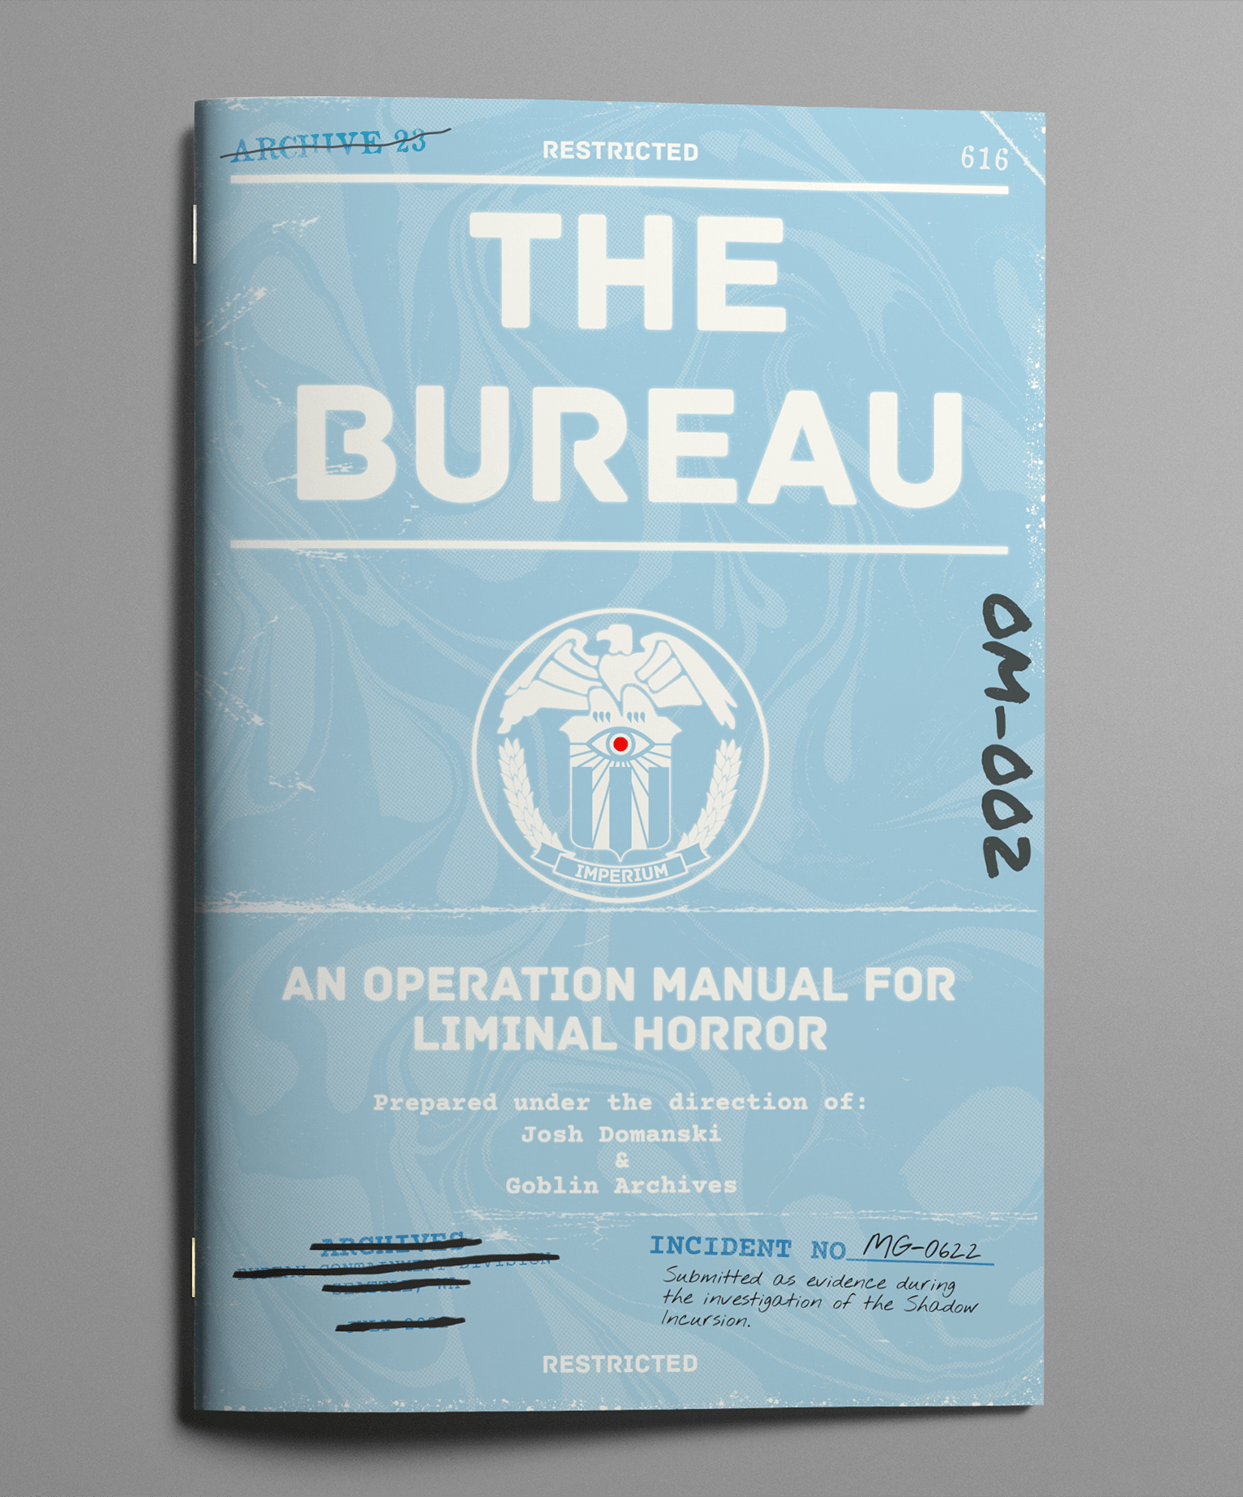 The Bureau - Exalted Funeral